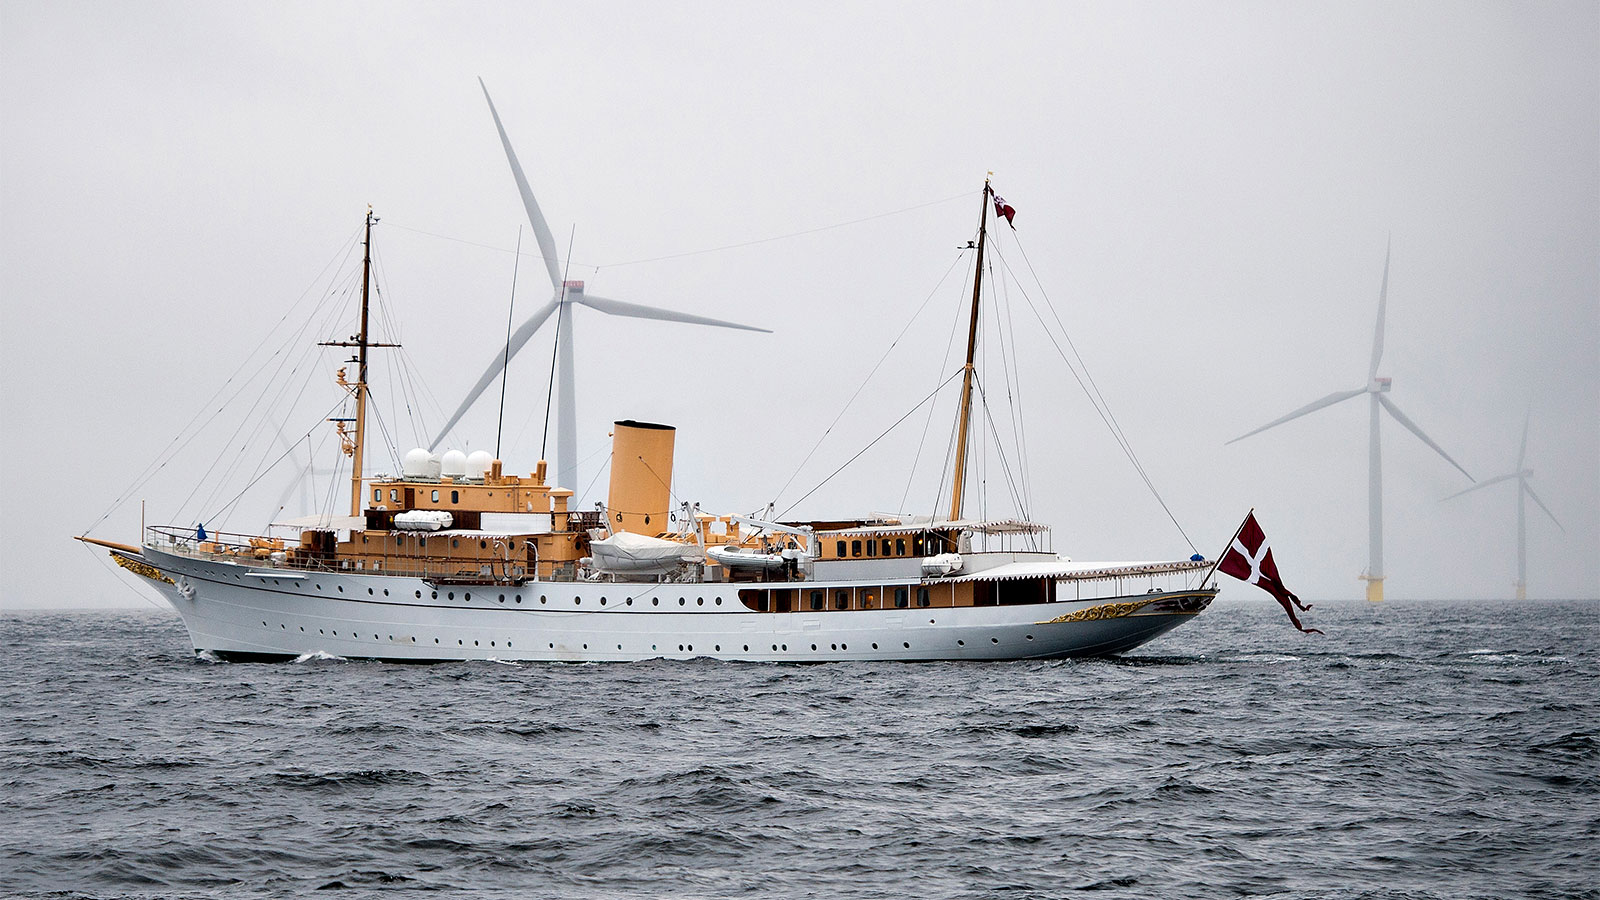 The Royal Danish Yacht passes by Denmark's largest offshore wind farm off of Anholt Island